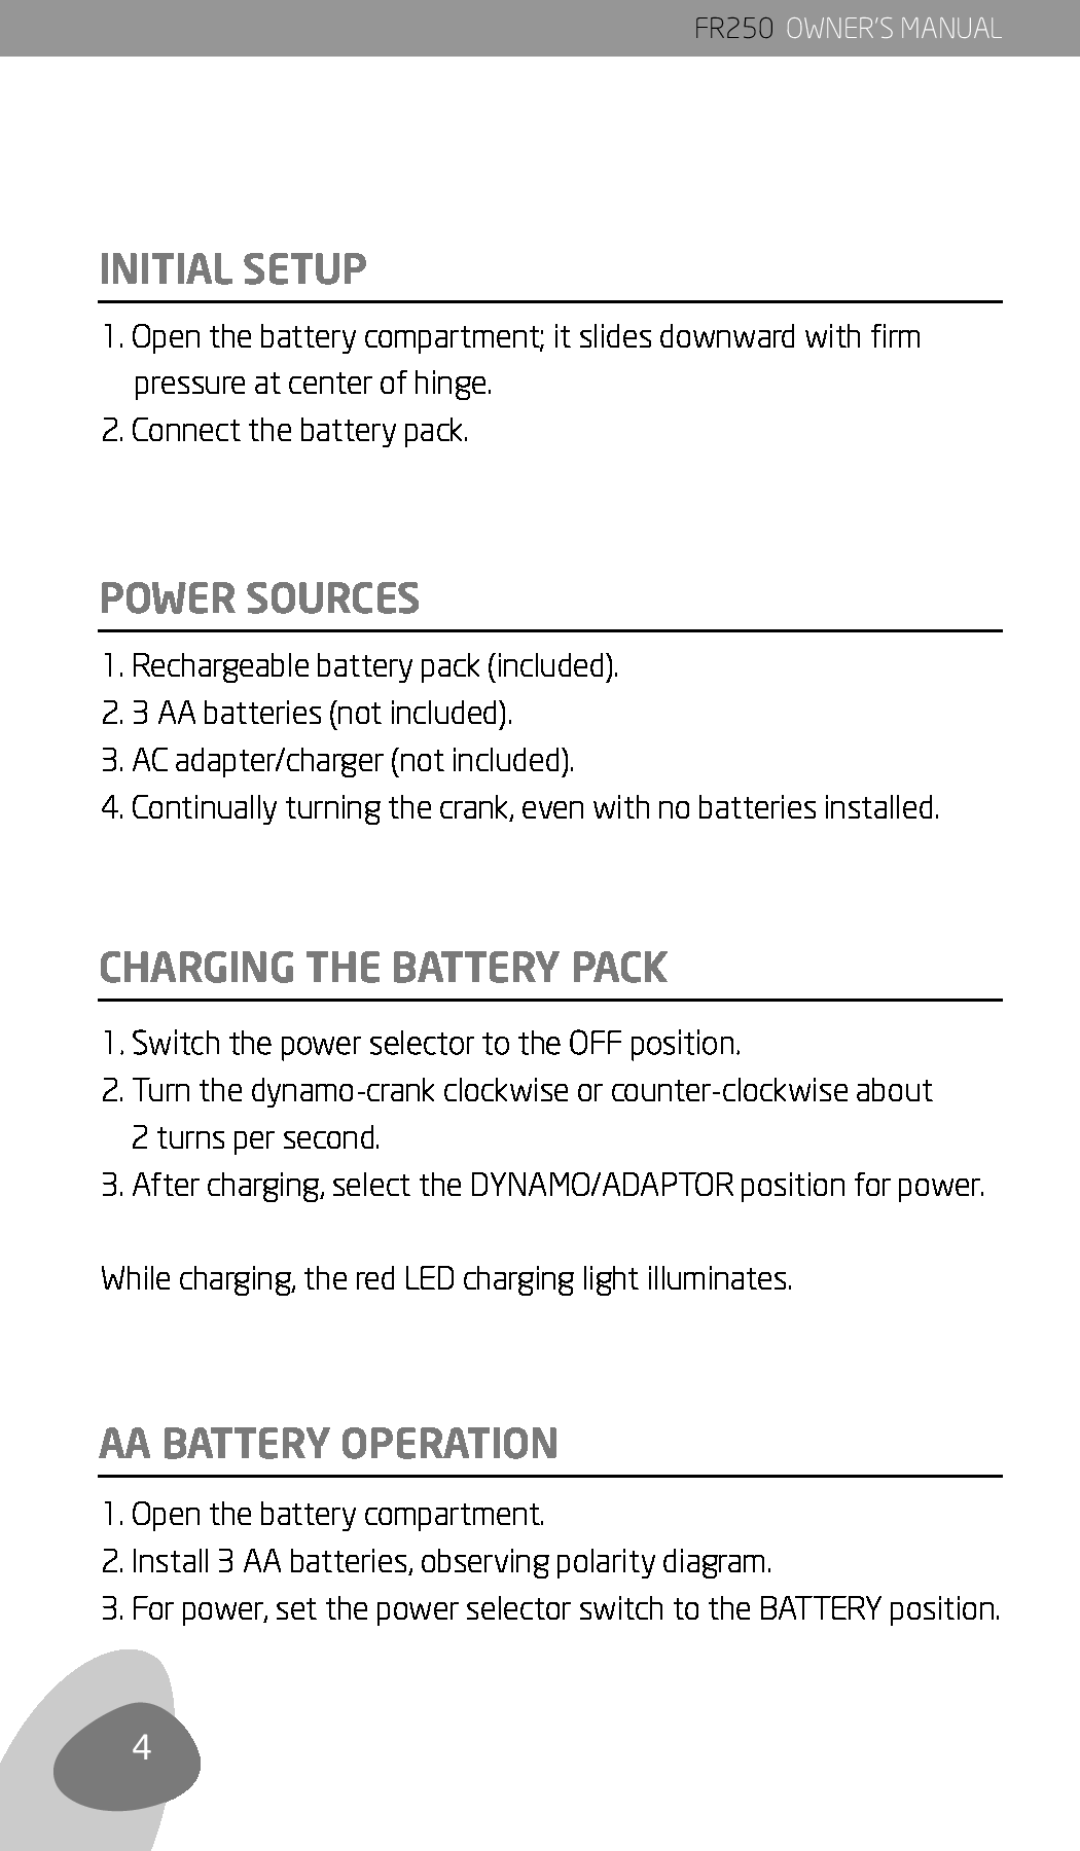 Eton FR250 owner manual Initial Setup, Power Sources, Charging The Battery Pack, Aa Battery Operation 